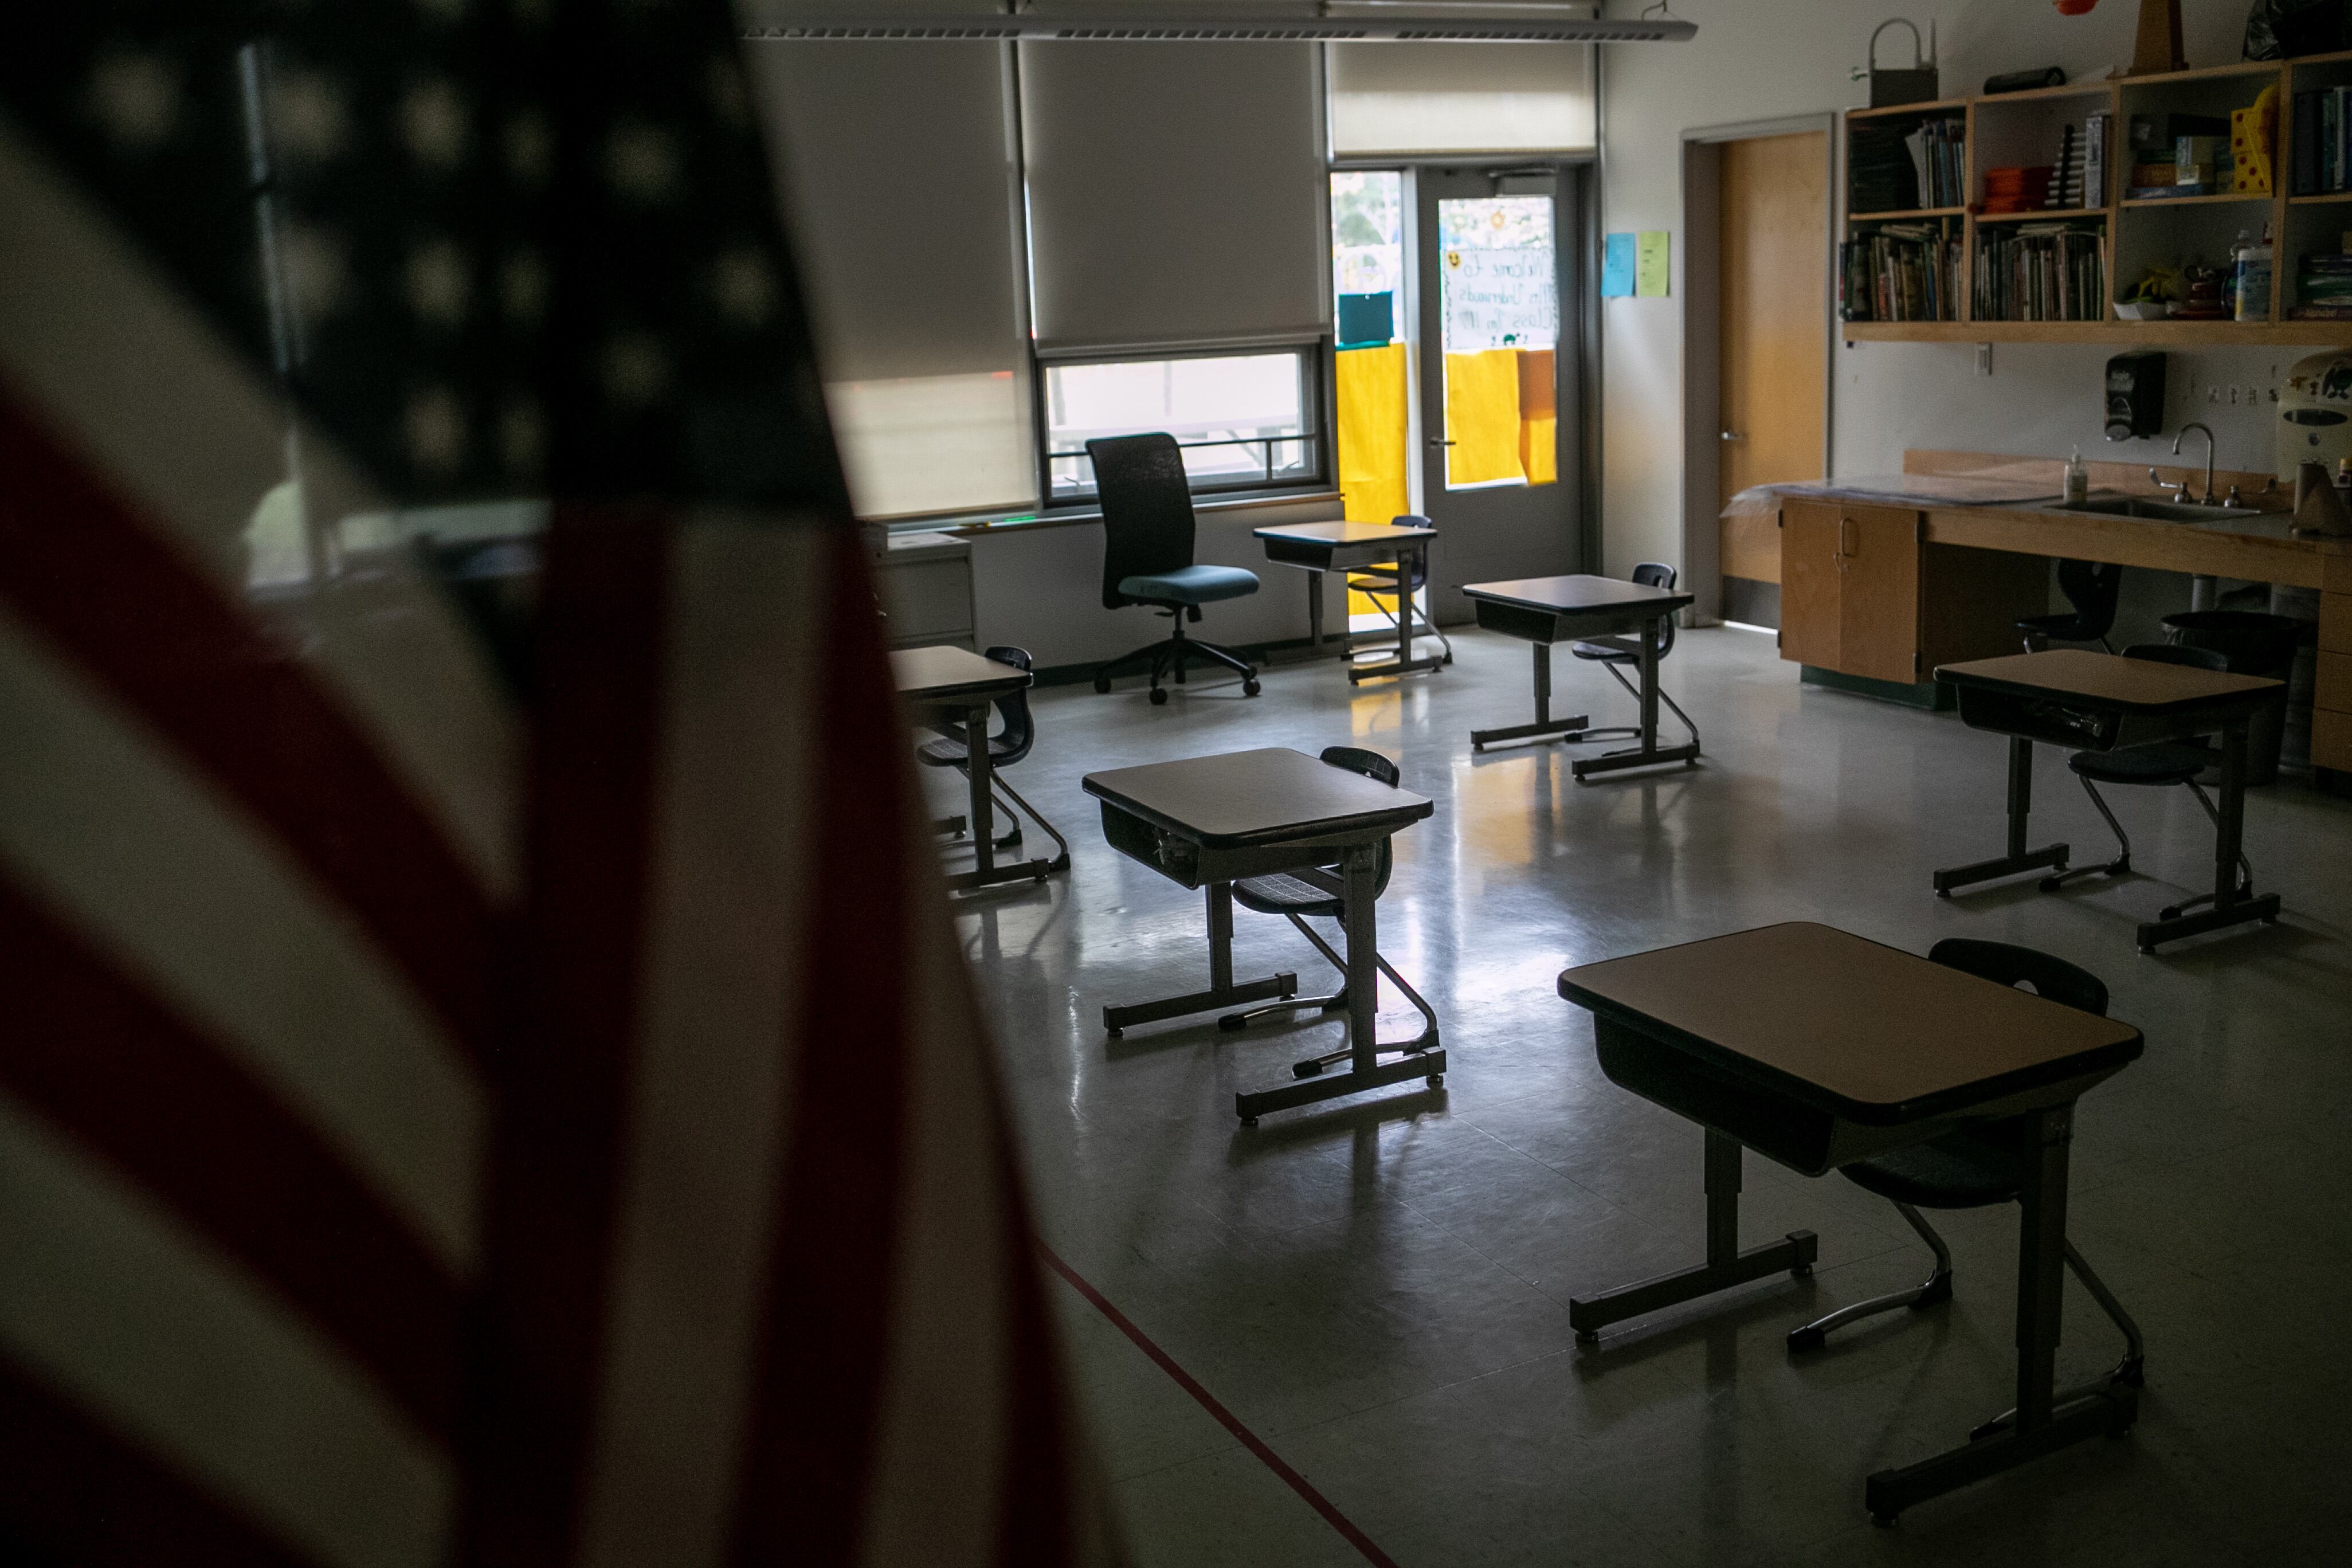 A photo with an American flag in front with a row of desks in a dimly lit classroom.